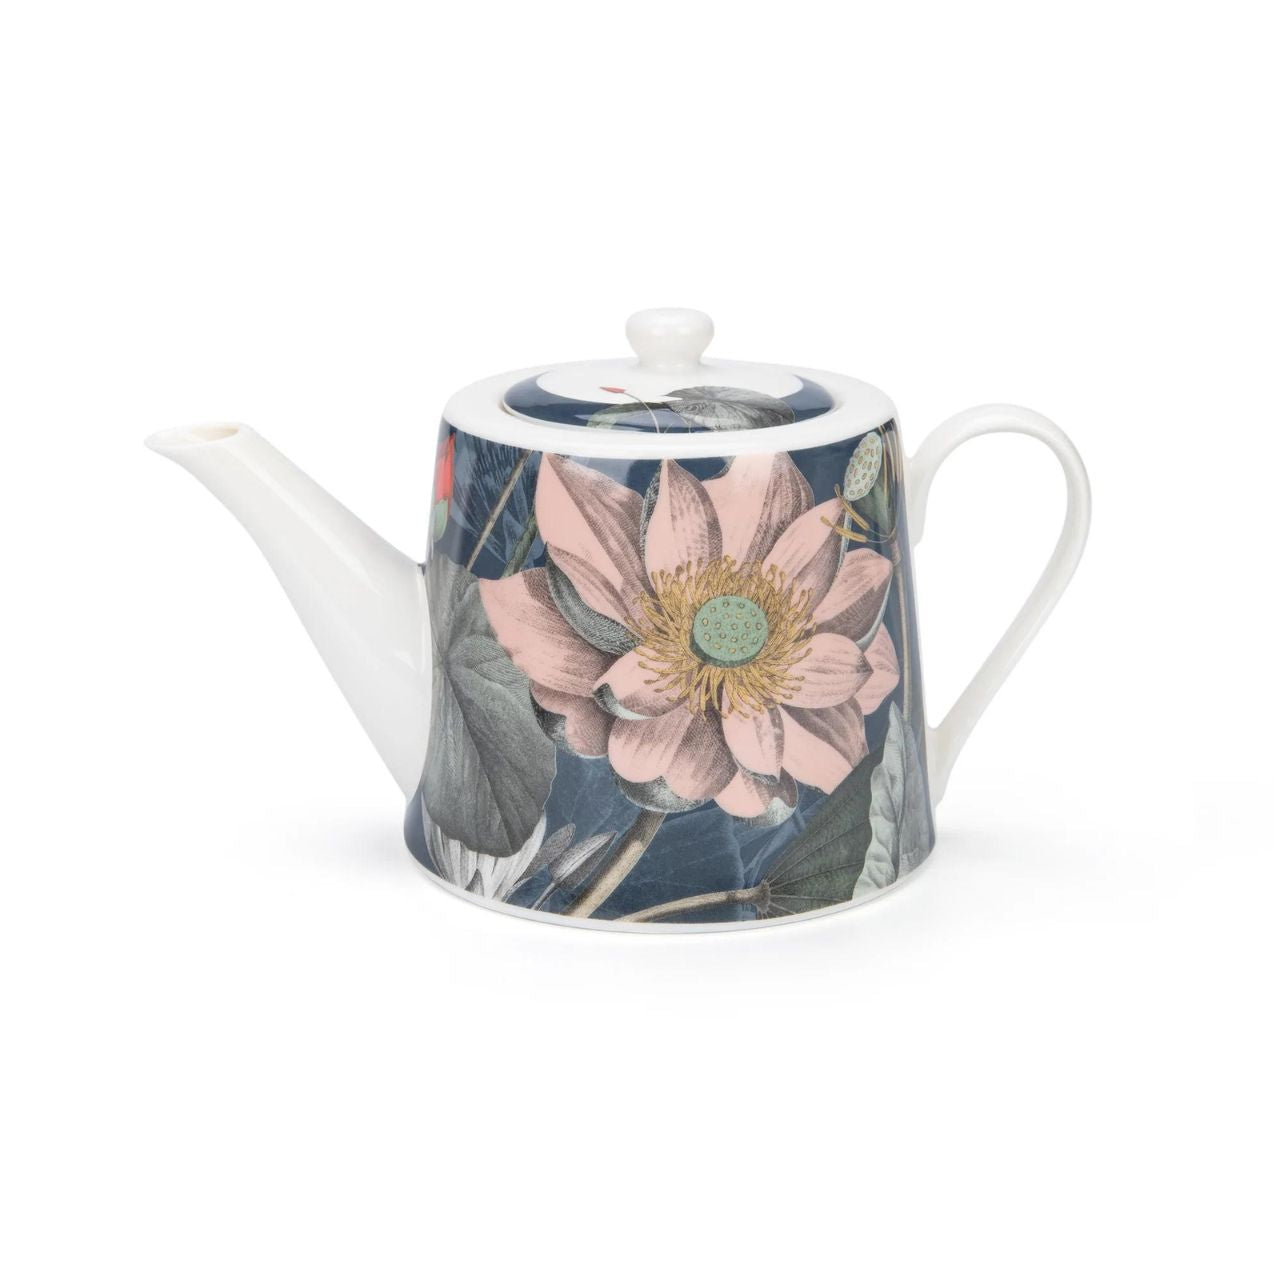 Natures Bloom Tea Pot by Mindy Brownes Interiors  A beautiful tea pot depicting gorgeous flowers in pink, blue and green. - Ideal house warming gift, new home, birthday or general occasion. - Part Of our Natures Bloom Tabletop Collection